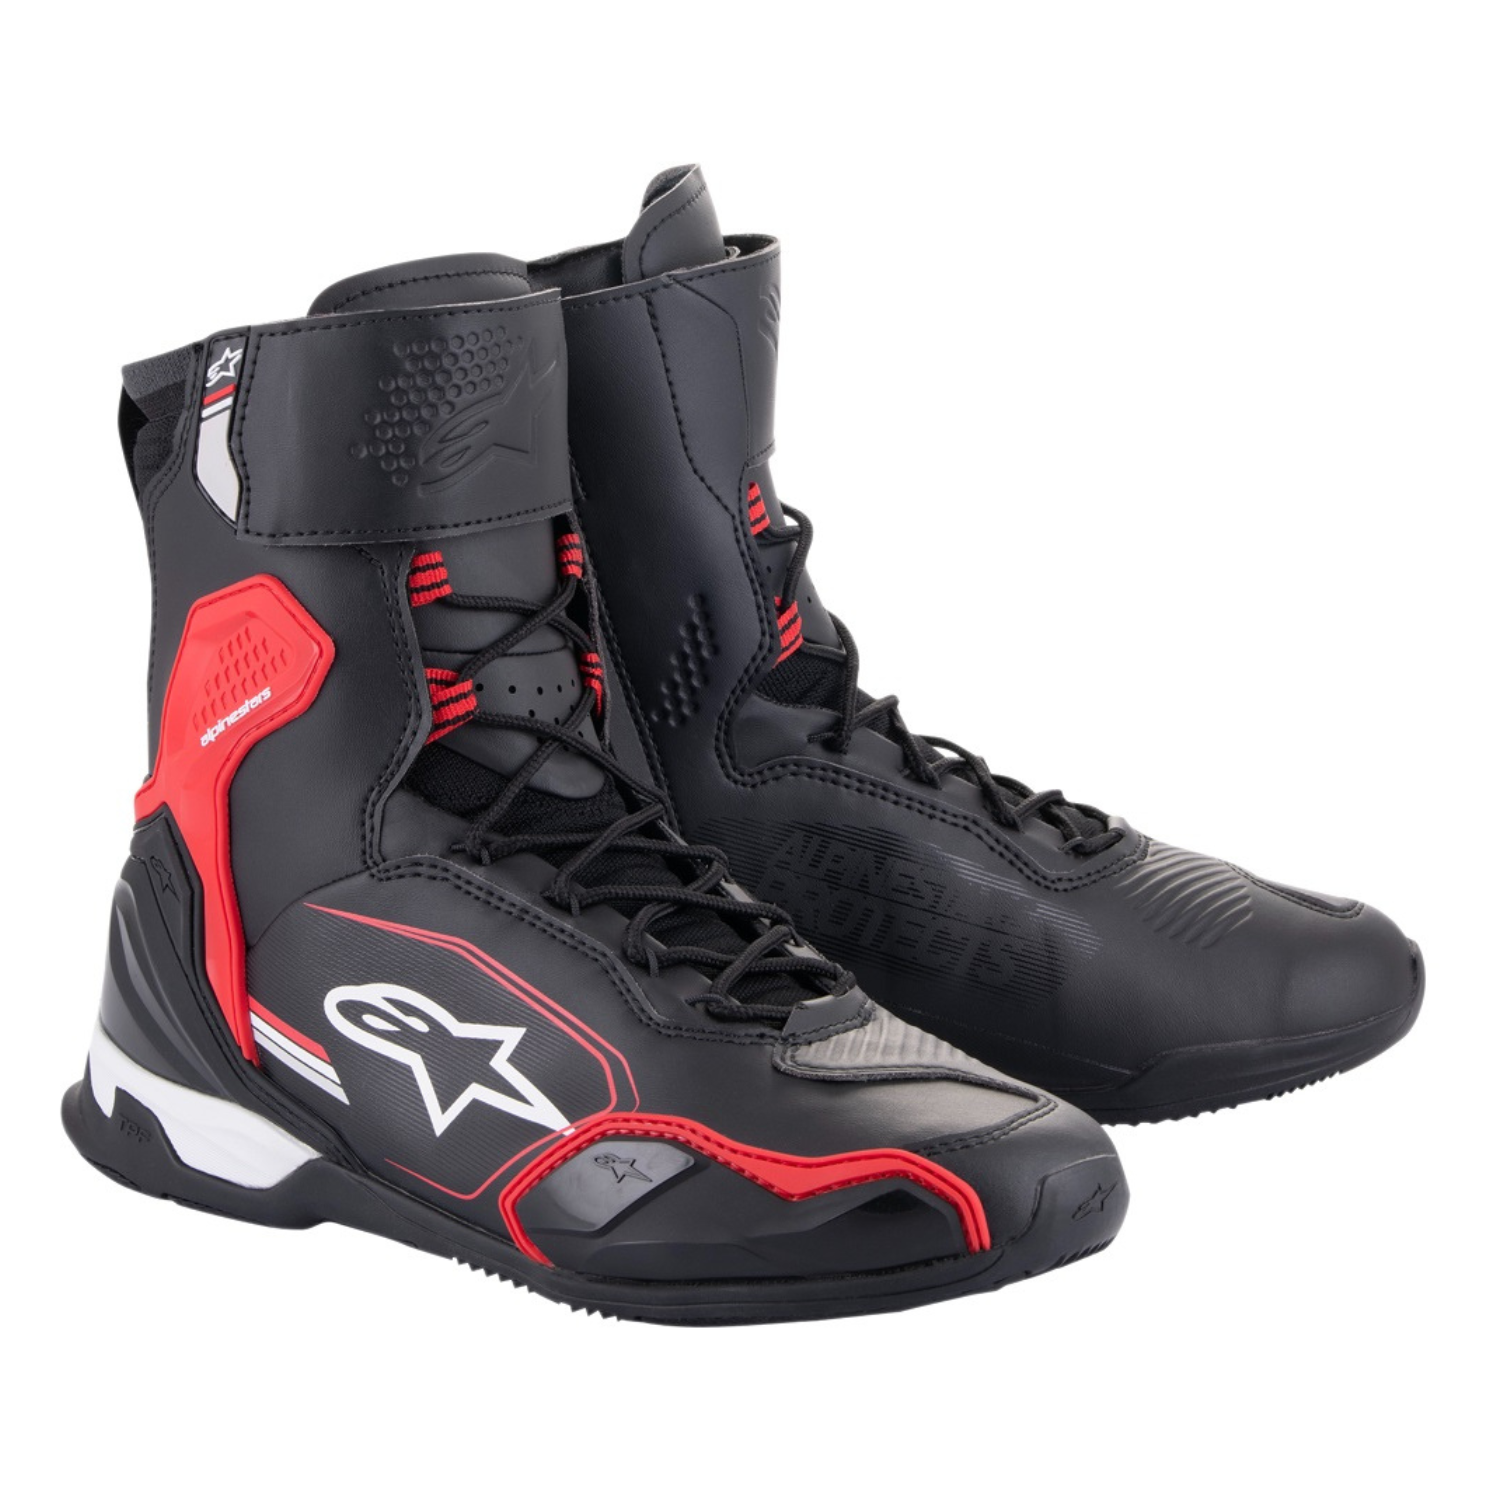 Image of EU Alpinestars Superfaster Shoes Black Bright Red White Taille US 65